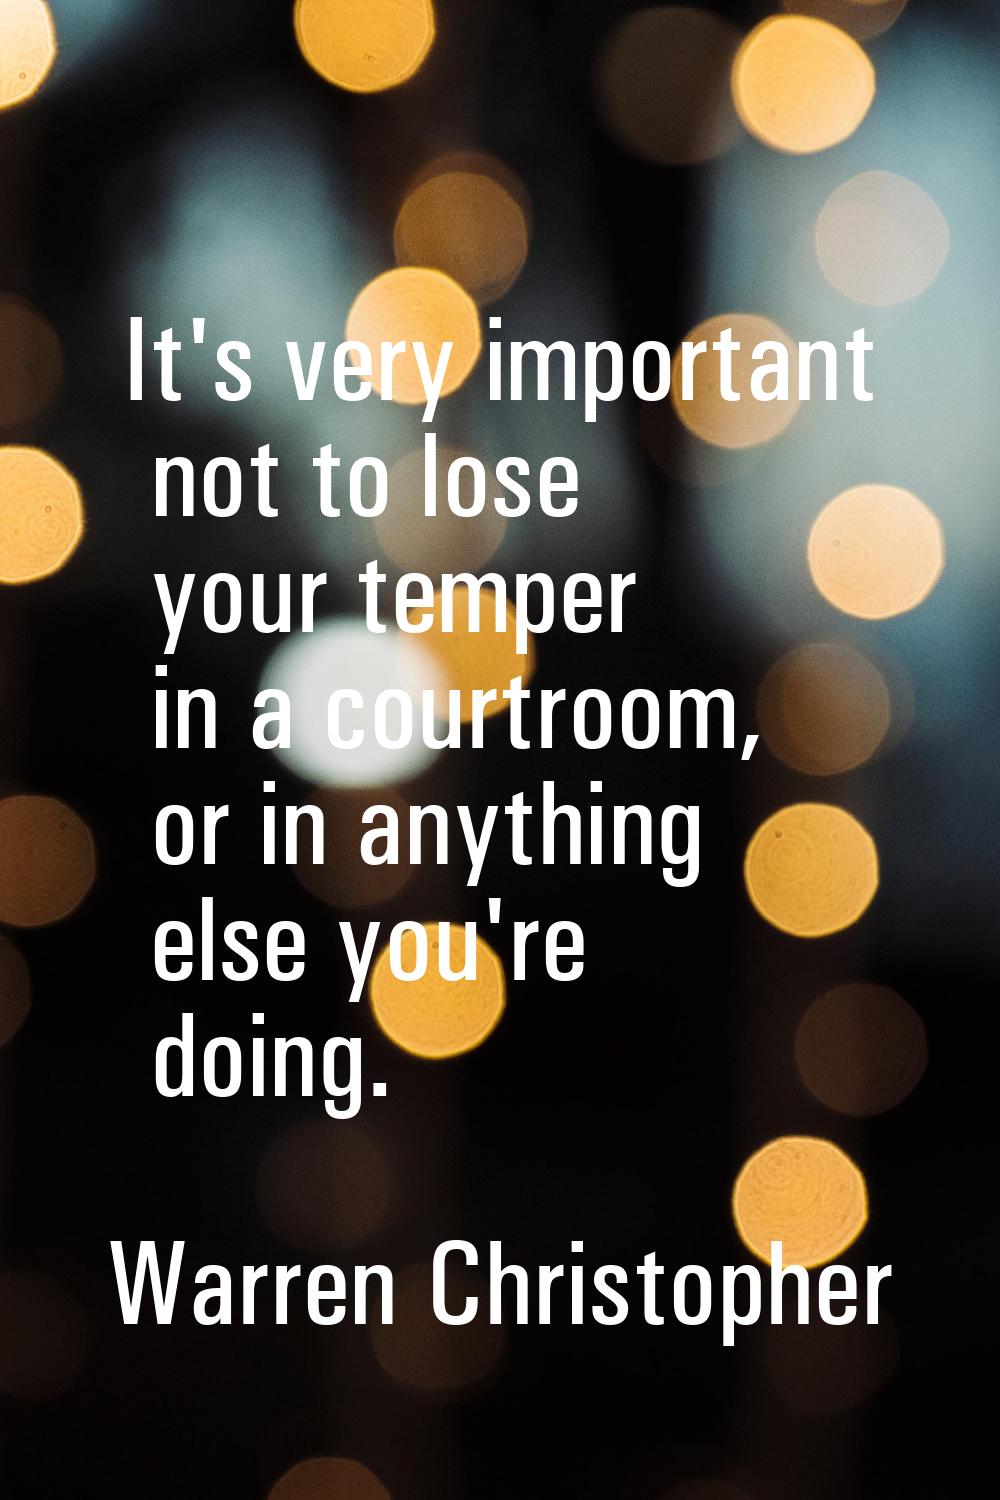 It's very important not to lose your temper in a courtroom, or in anything else you're doing.